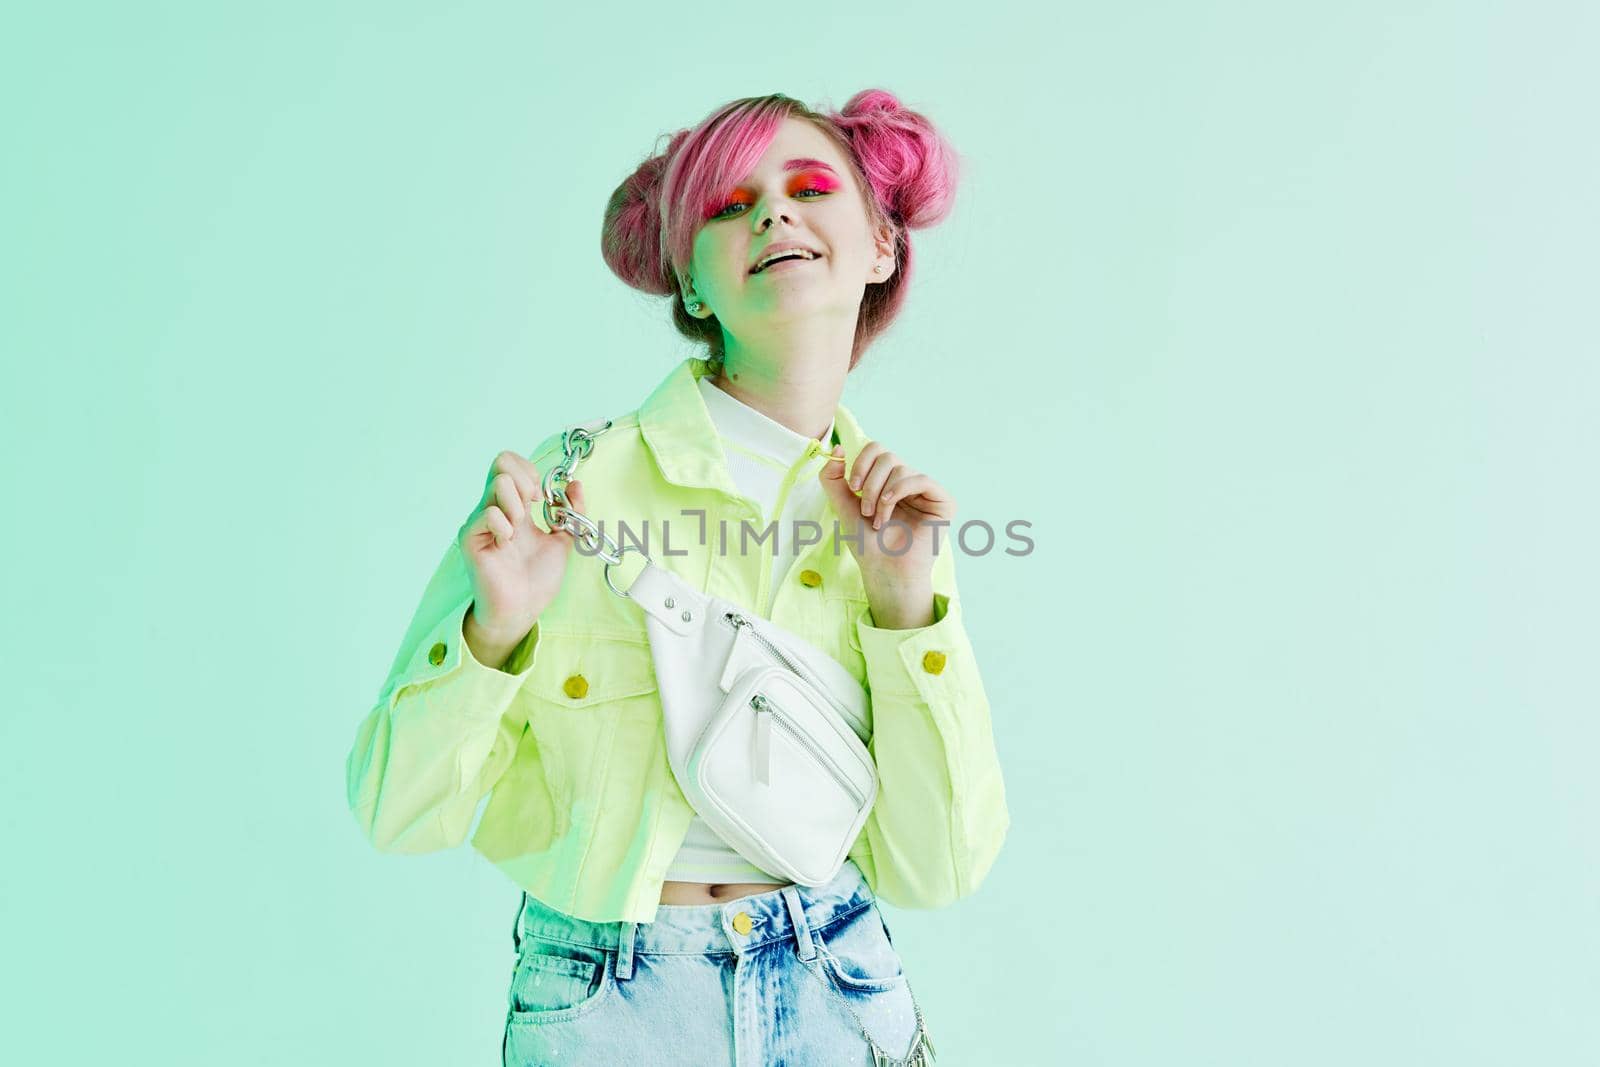 cheerful woman with bright makeup pink hair Glamor posing fun. High quality photo